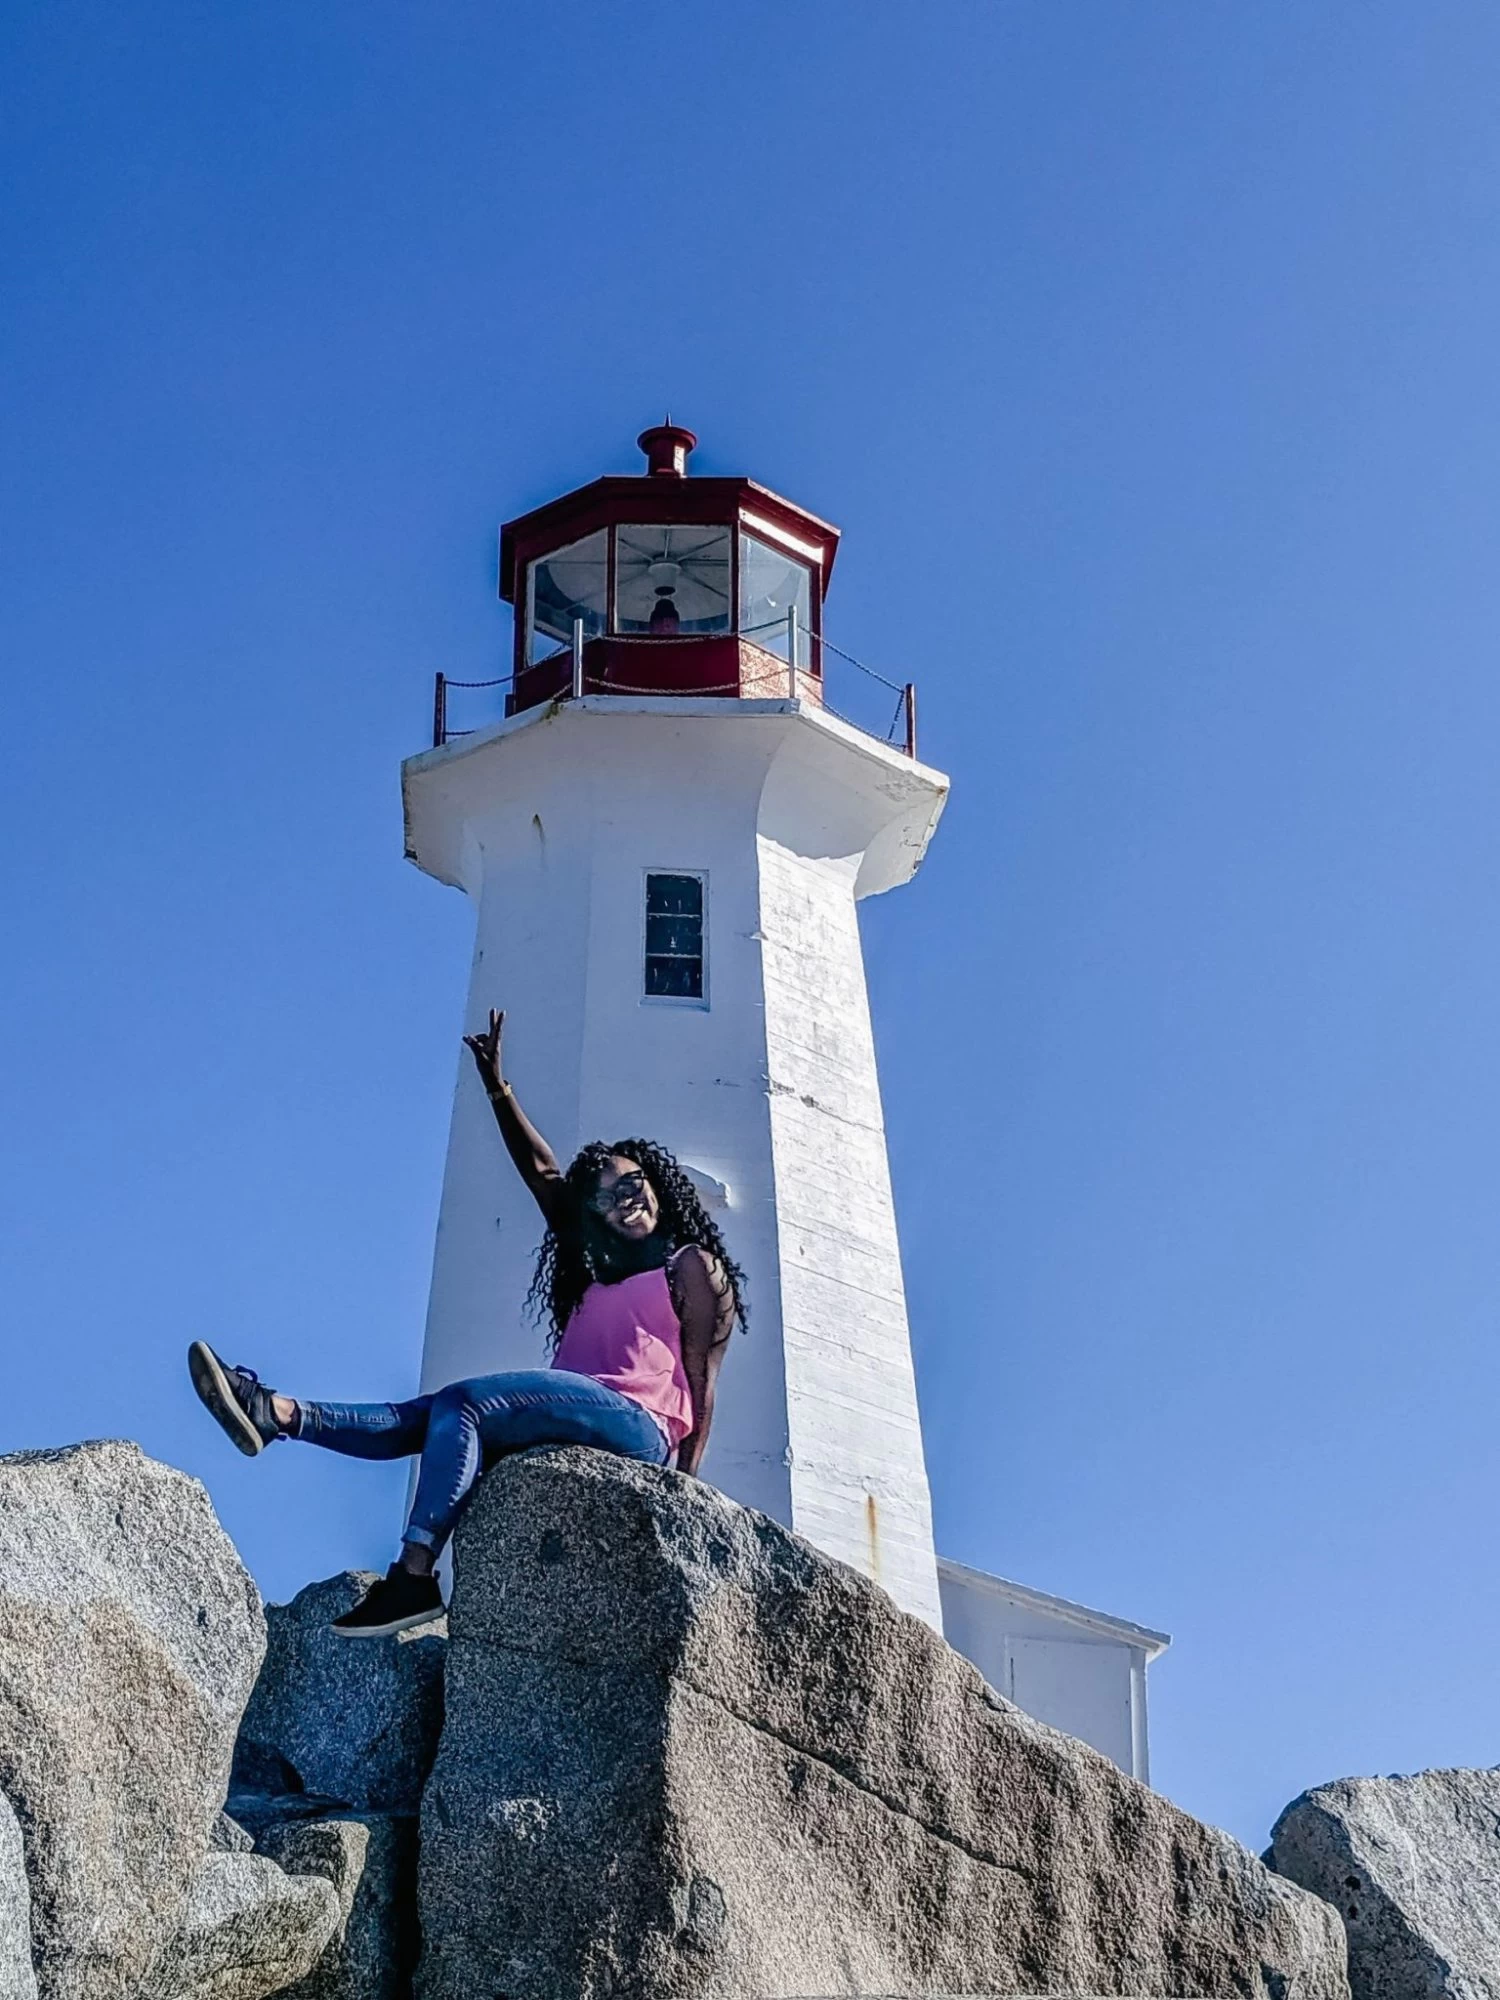 Snapping a cool picture at Peggy's Cove in Nova Scotia